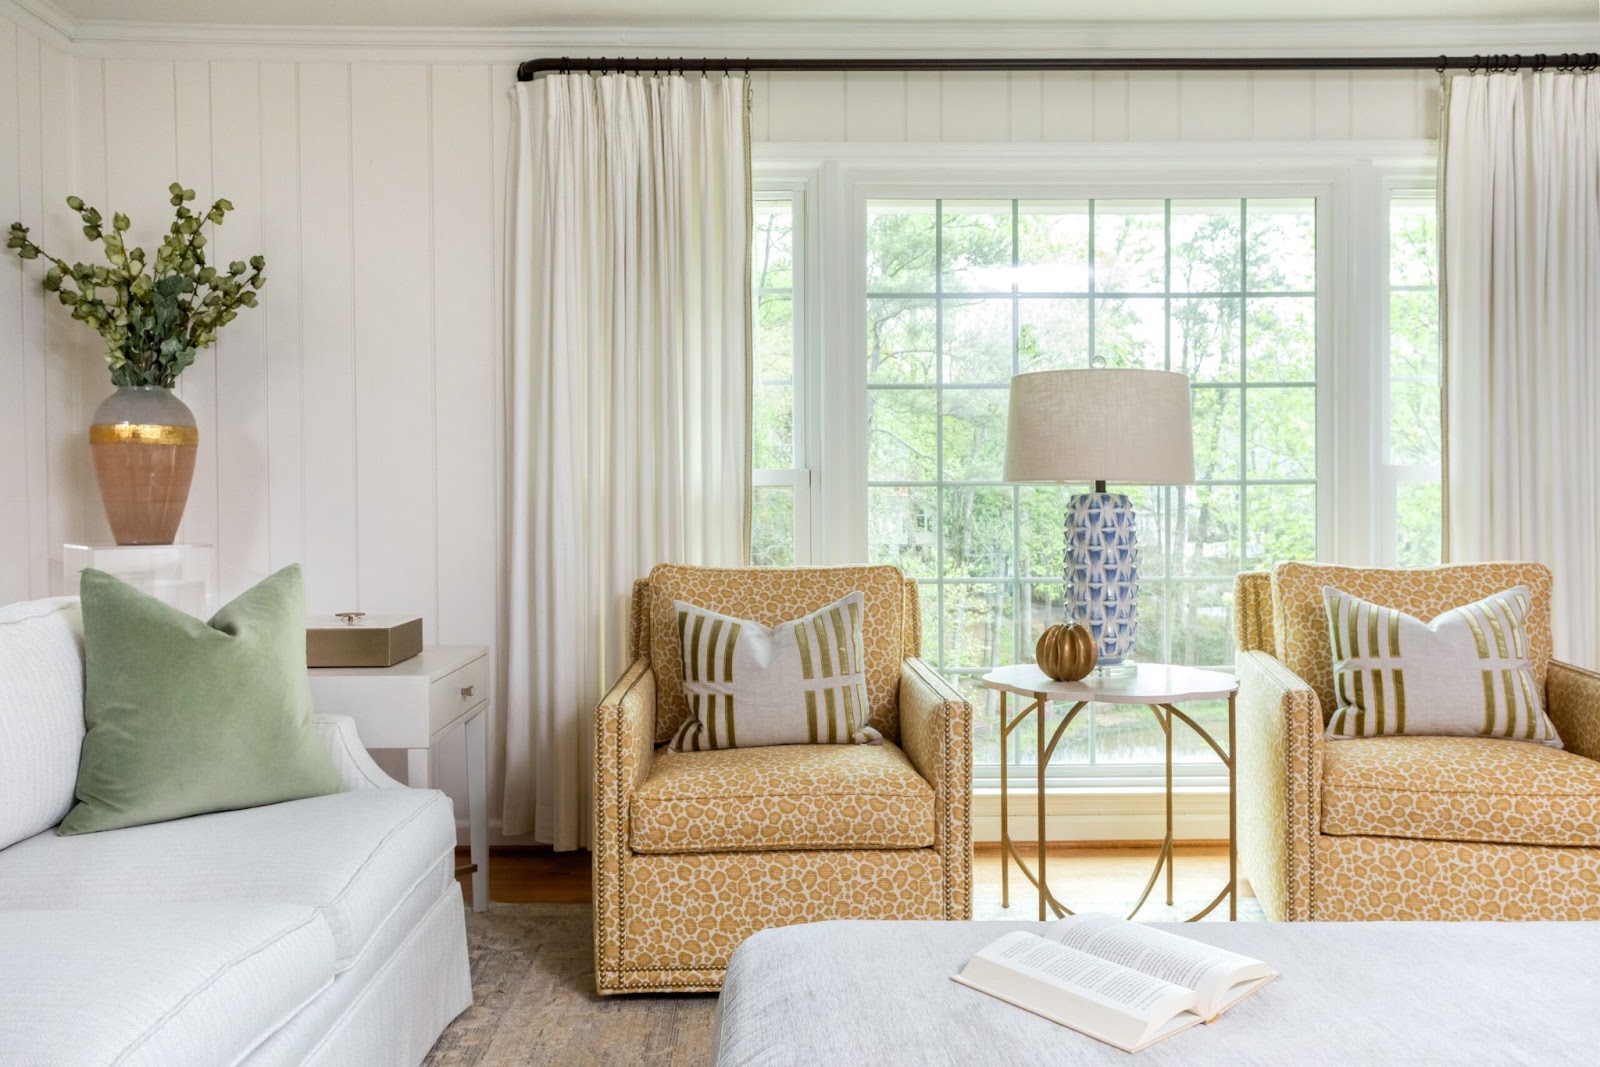 The corner of a white living room featuring two swivel cheetah print chairs, a white sofa and ottoman, green pillow, blue lamp, and gold vase with greenery. This is an example of a project where custom furniture design in Atlanta was offered. 